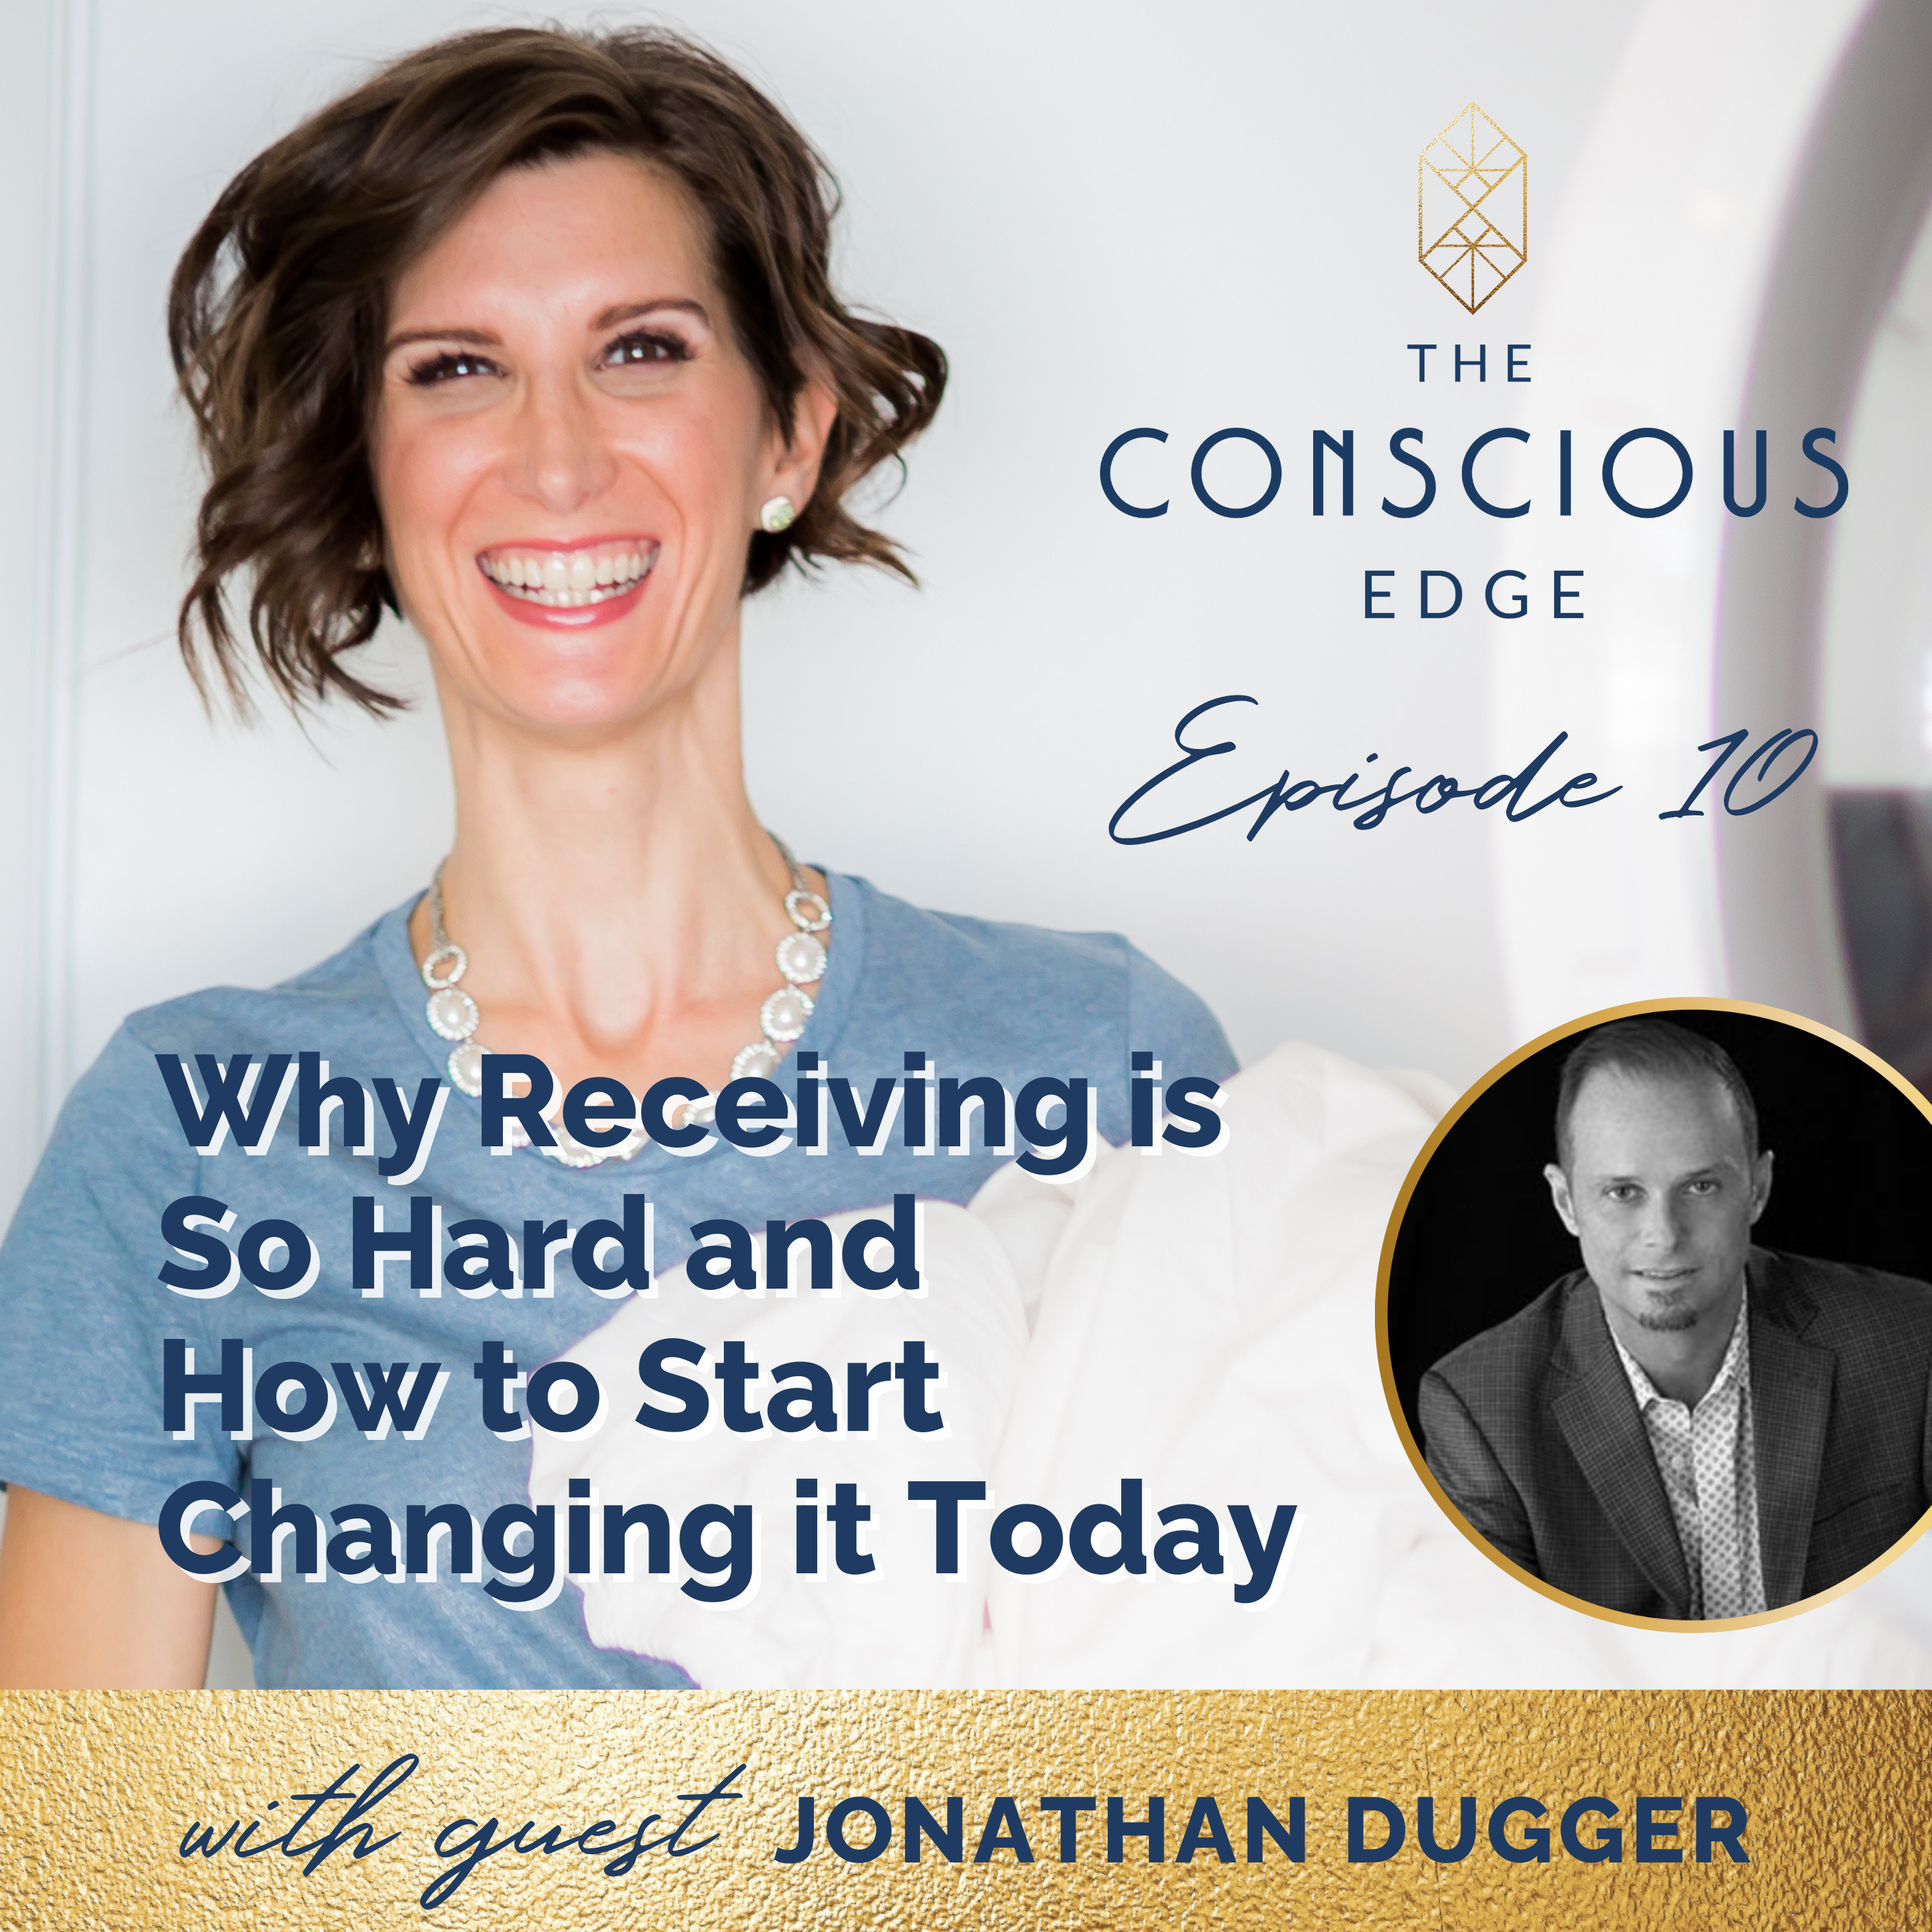 Why Receiving is So Hard and How to Start Changing It Today